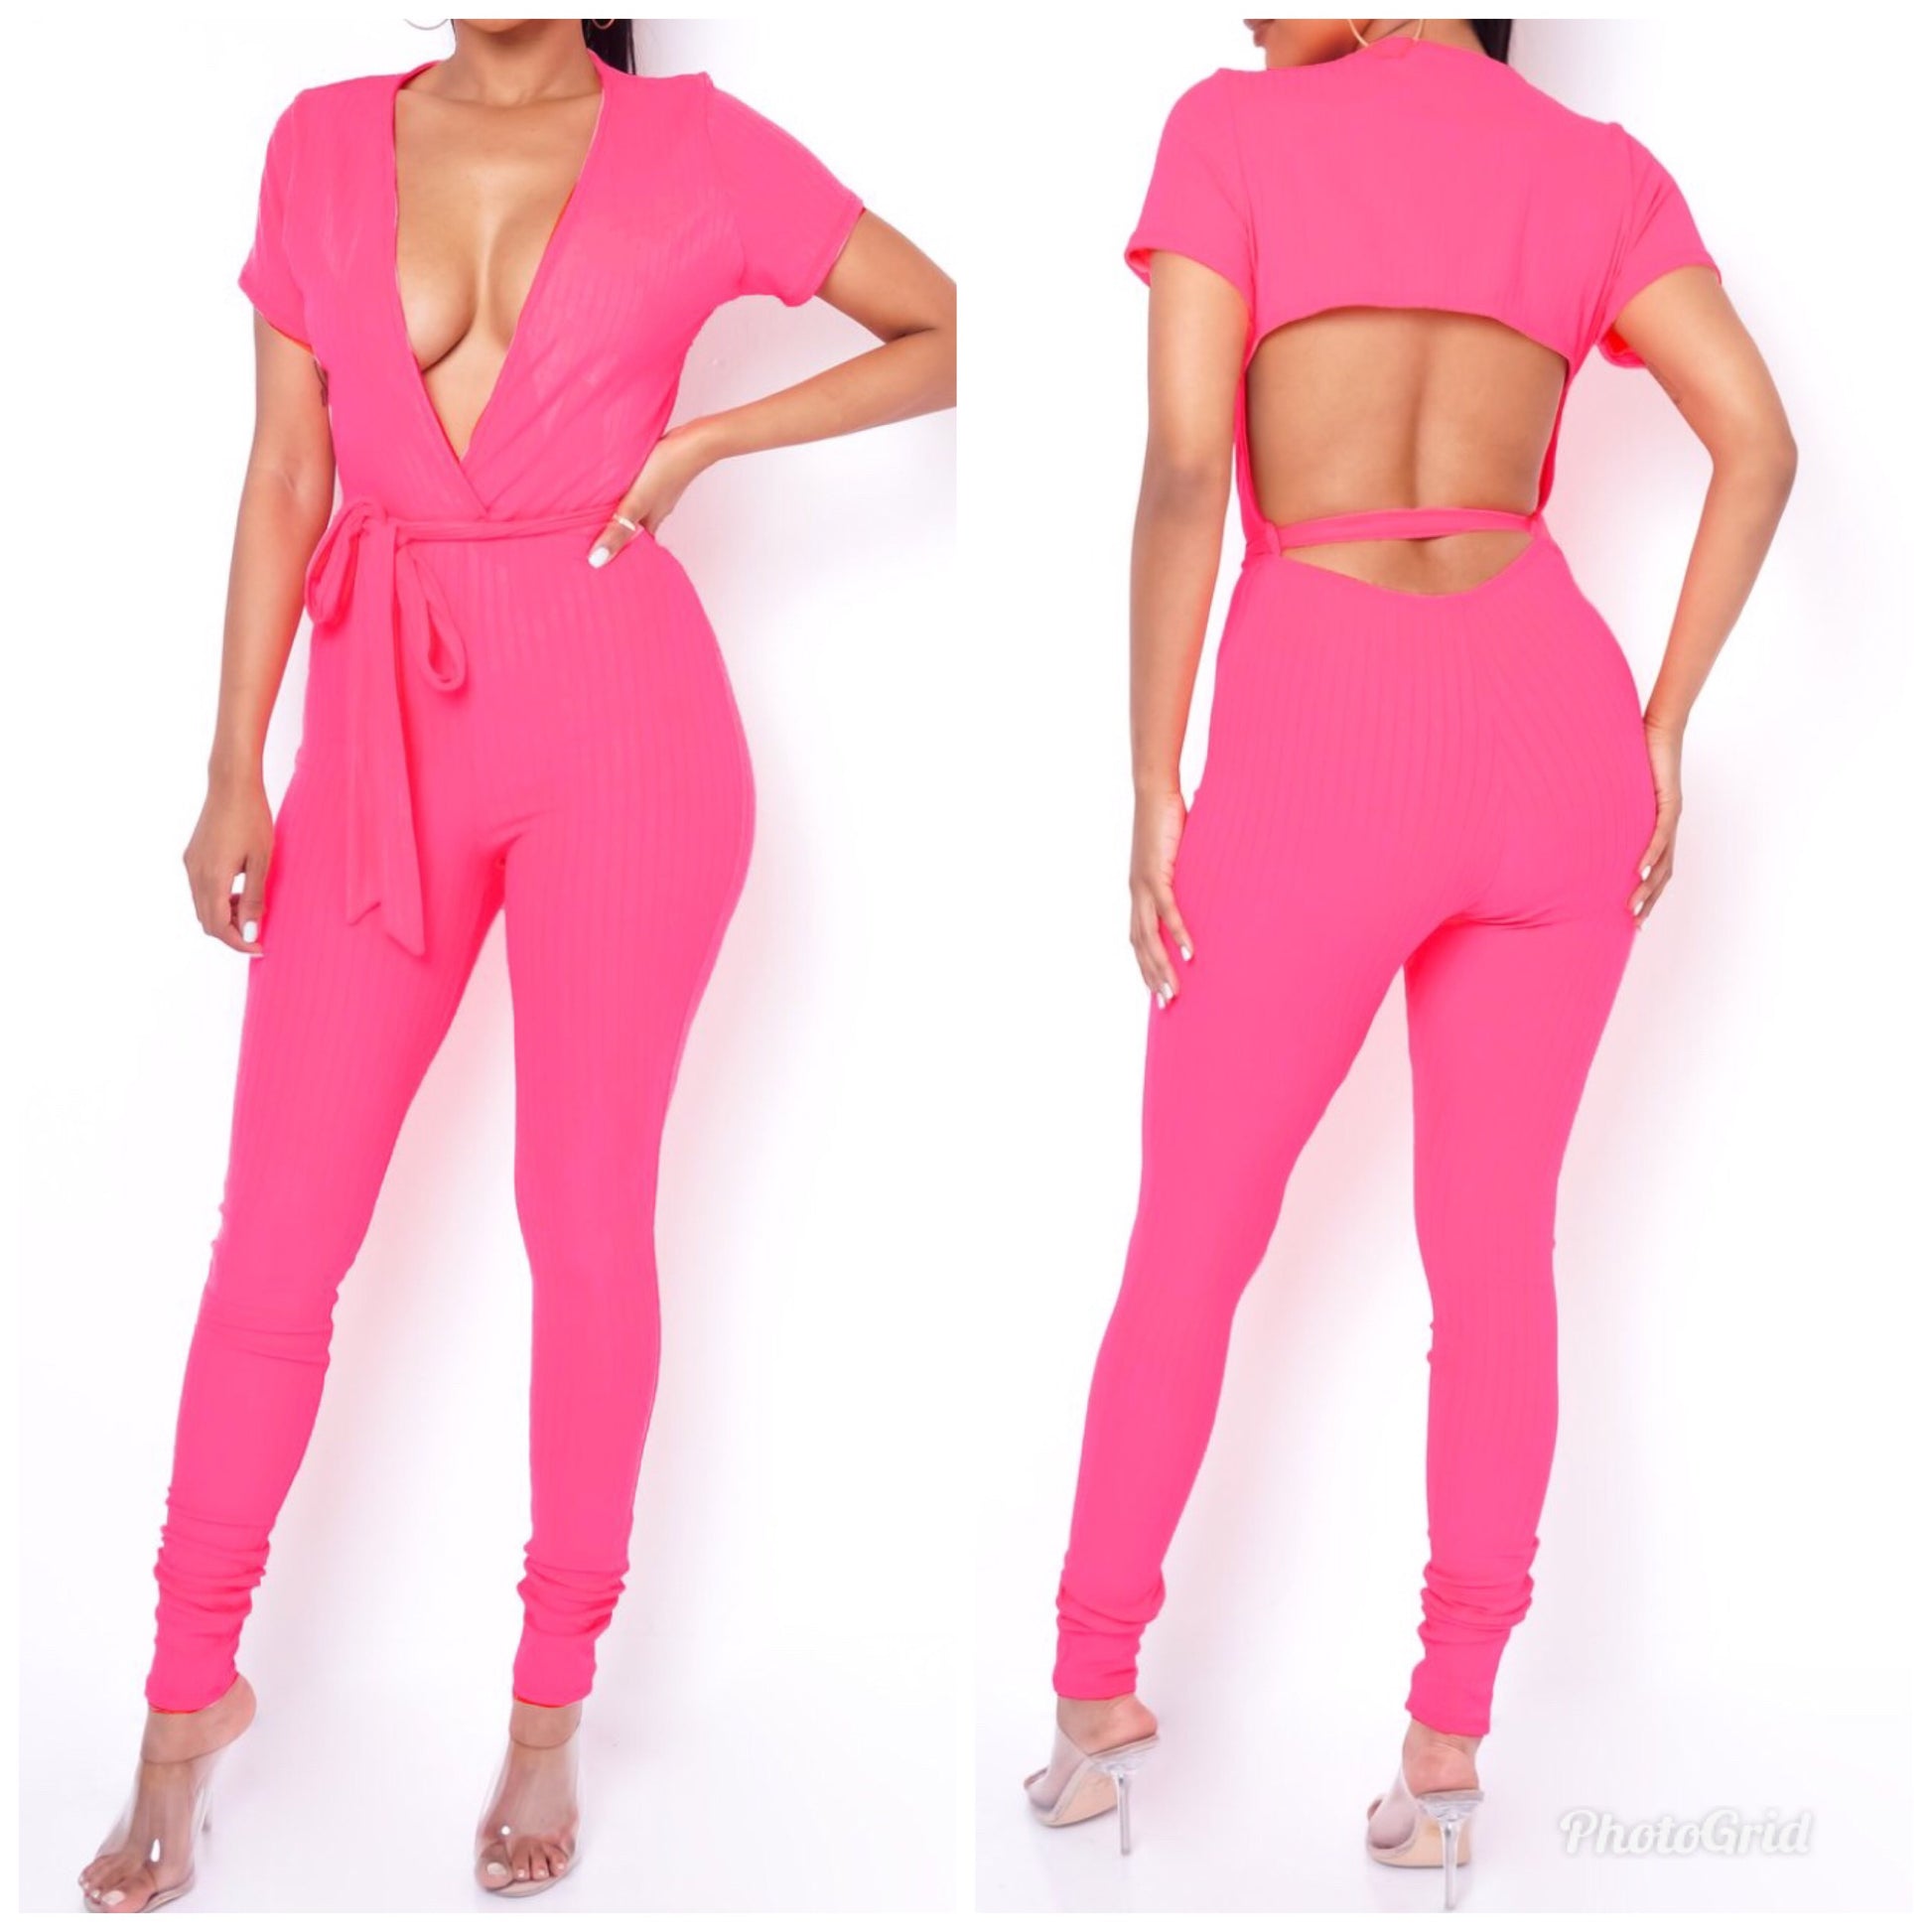 Pink Panther Boutique